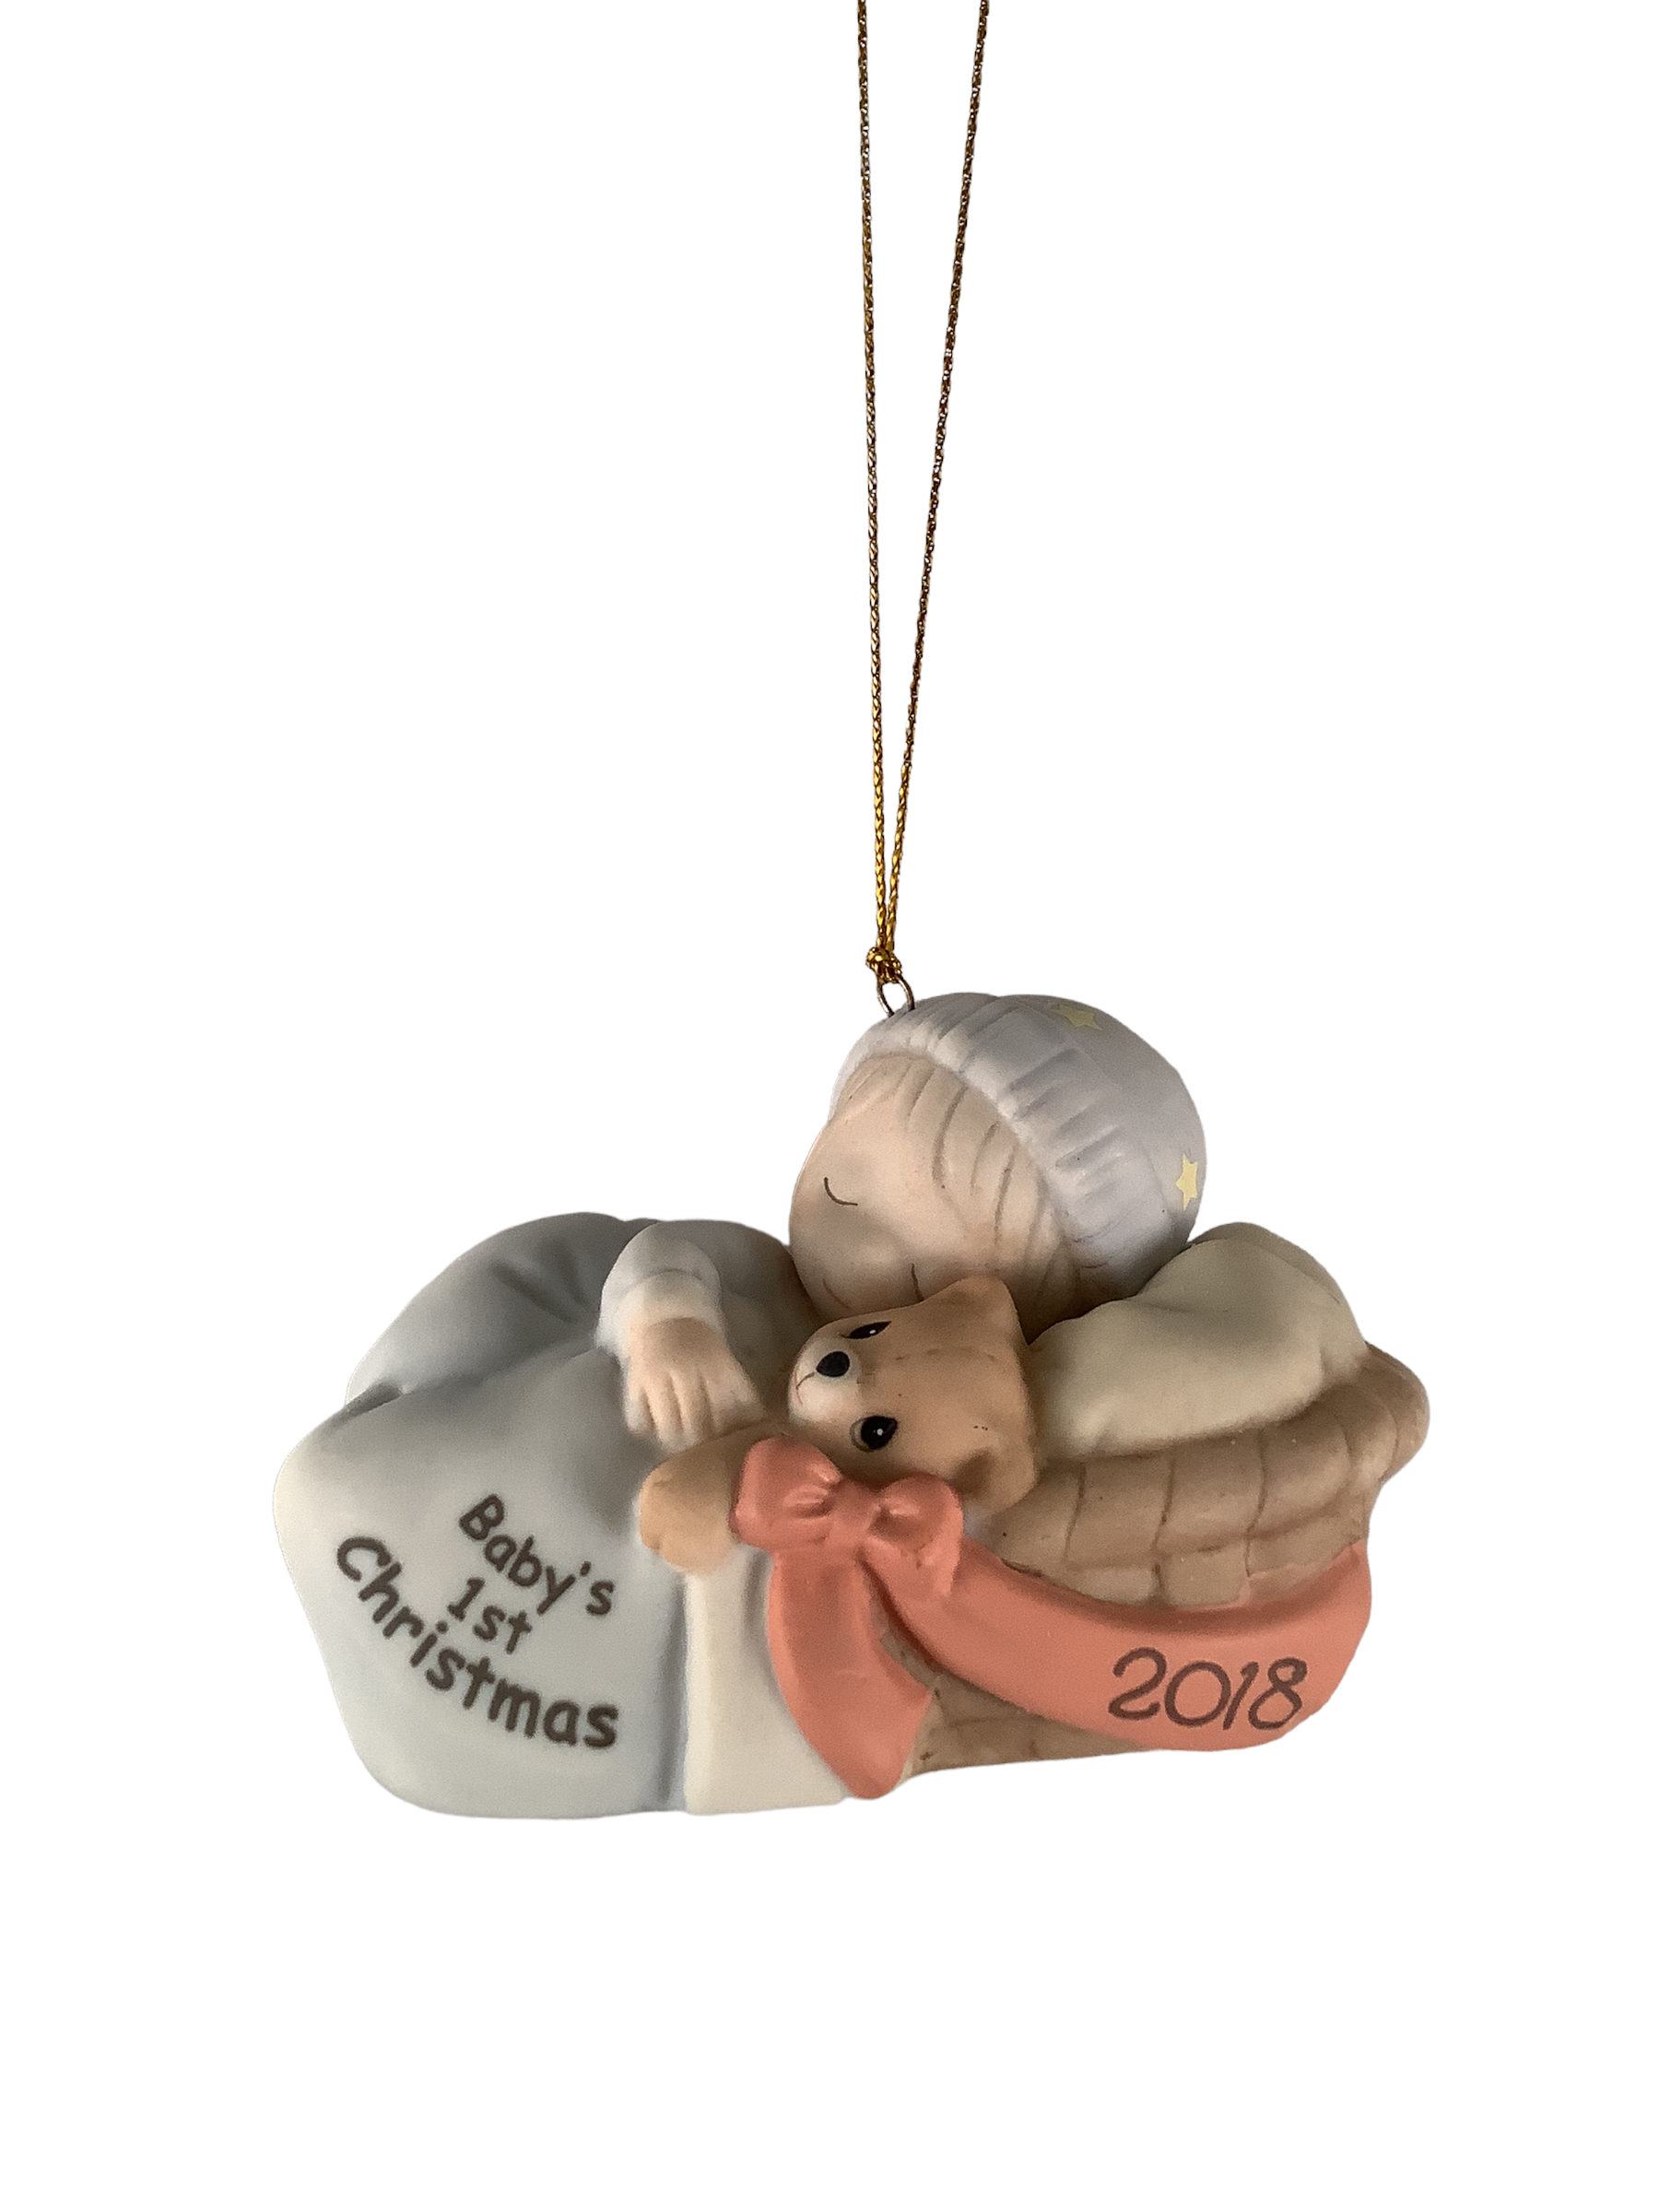 Baby's First Christmas 2018 (Boy) -  Precious Moment Ornament